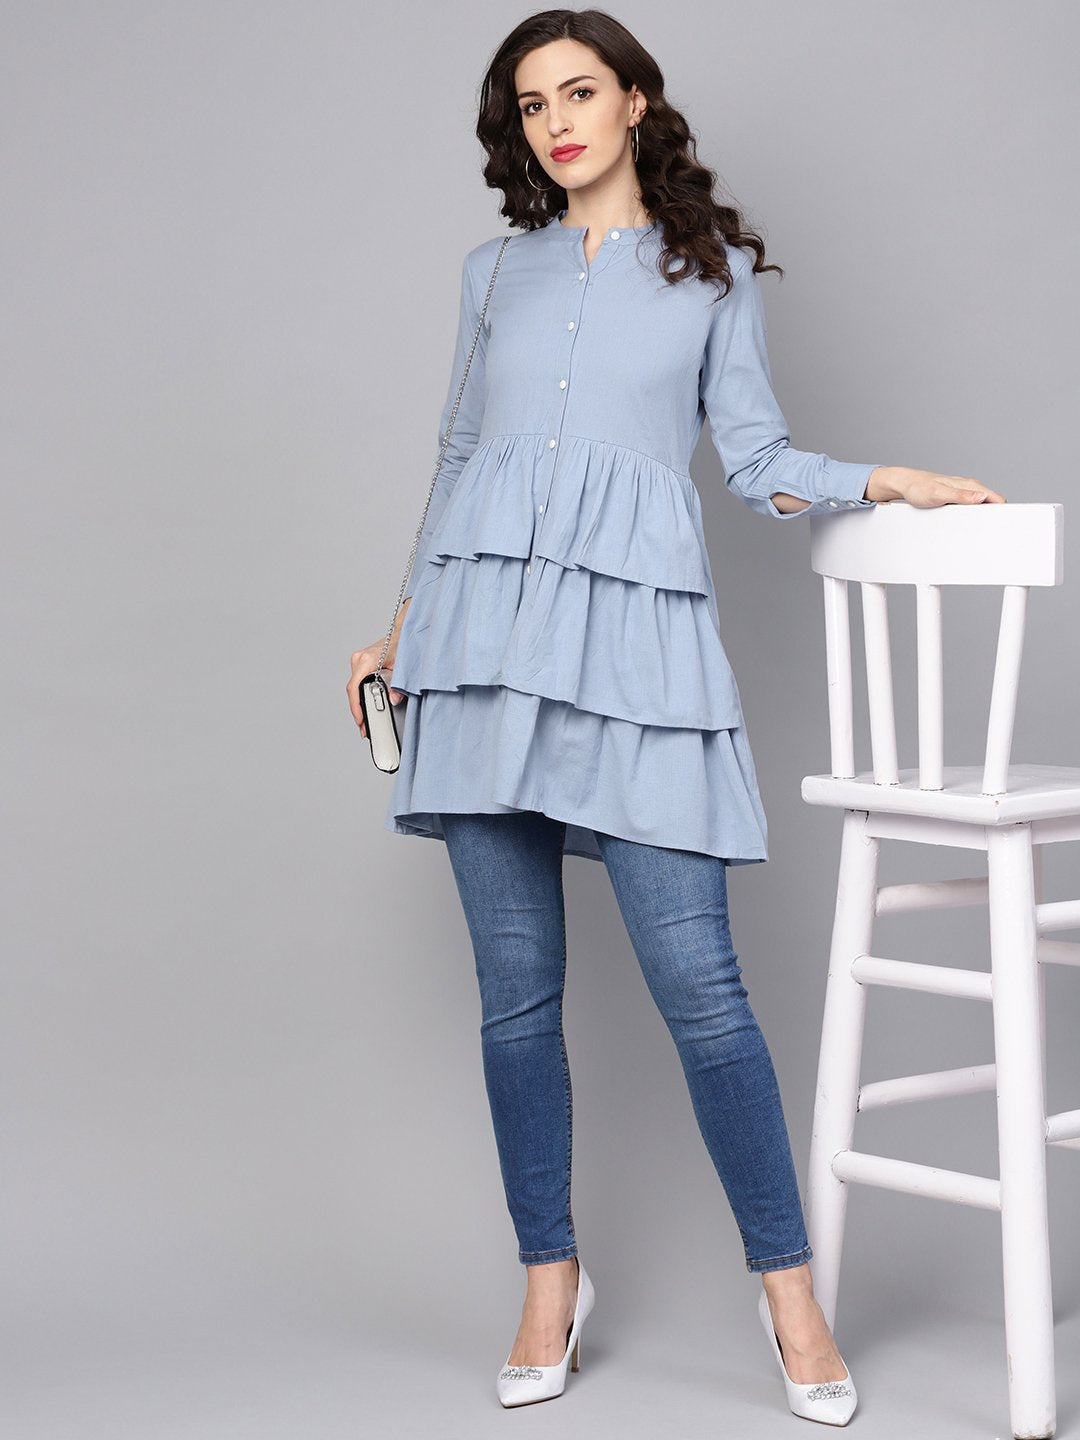 Women's Solid Ice Blue Tired Tunic With Madarin Collar & 3/4 Sleeves - Nayo Clothing